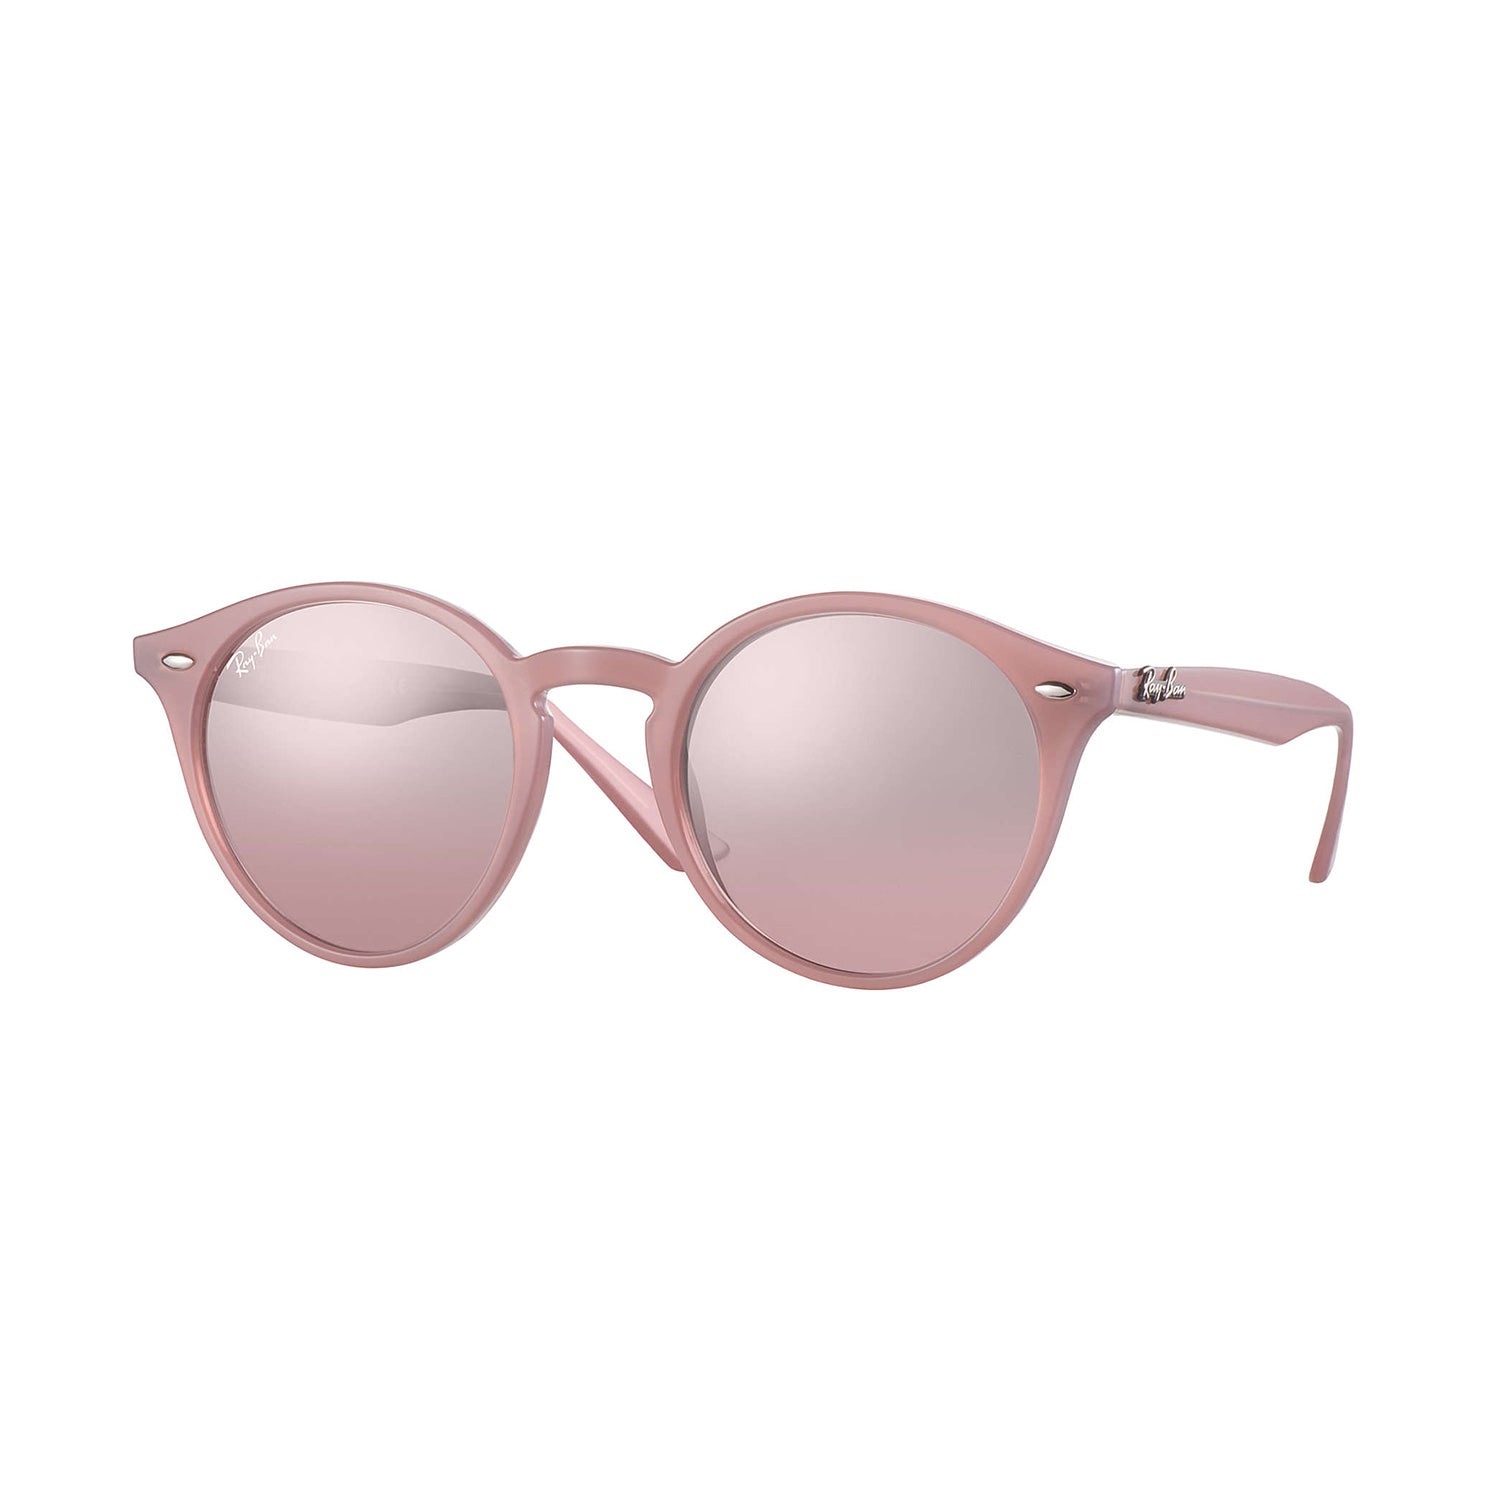 Ray Ban RB2180 - Pink Frame - Silver/Pink Gradient Mirror Lens | Altitude  Sports